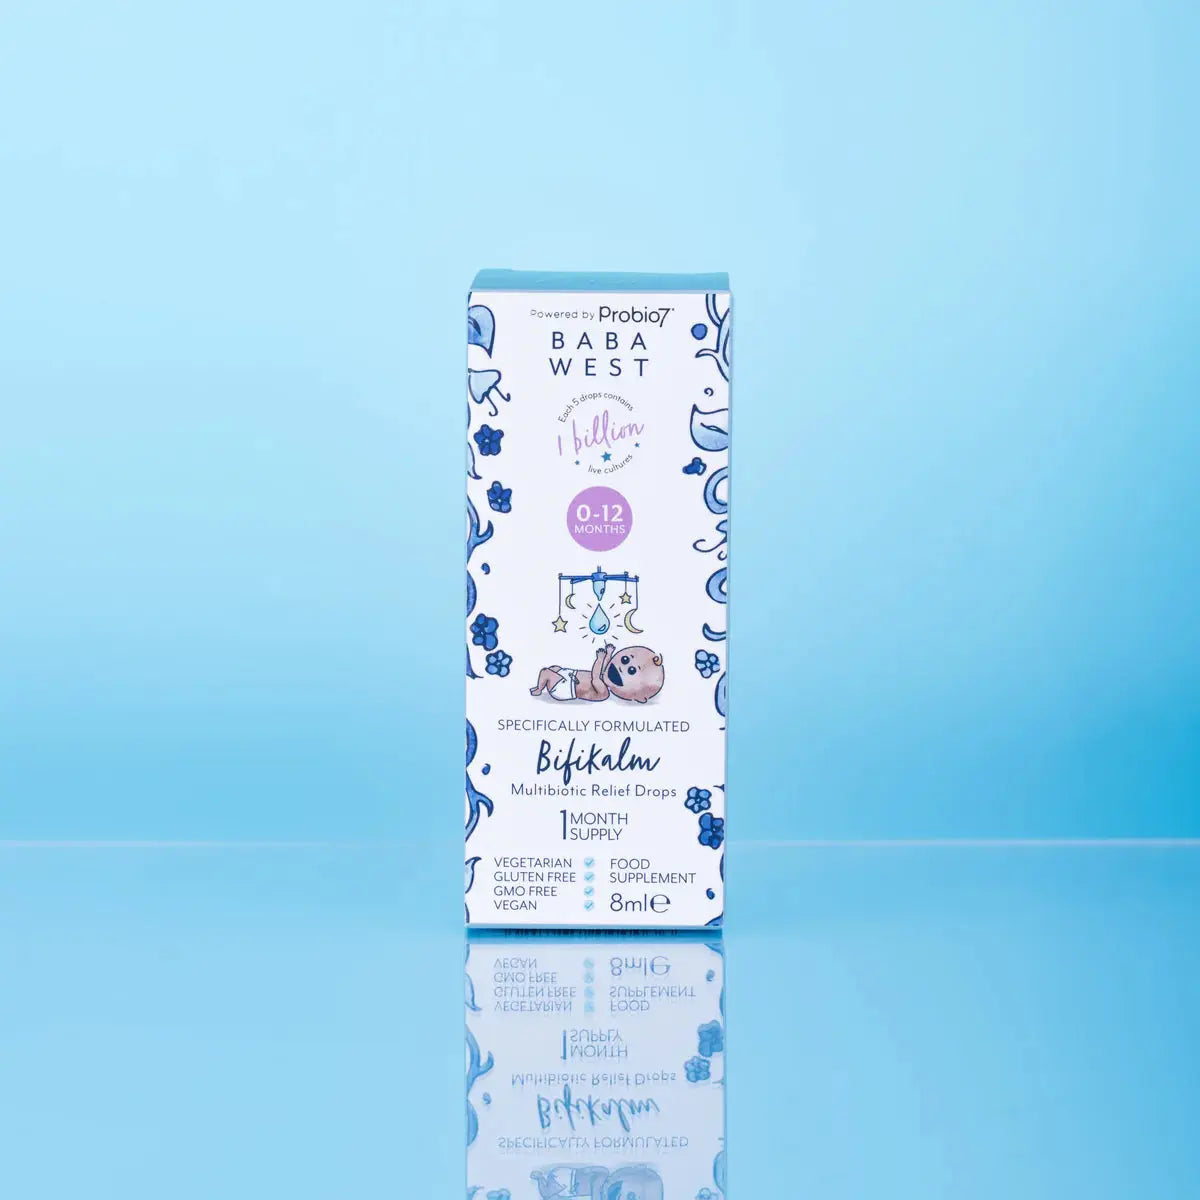 Bifikalm Multibiotic Relief Drops 0-12 months-Toiletries & baby brushes-Baba West-Blue Almonds-London-South Kensington